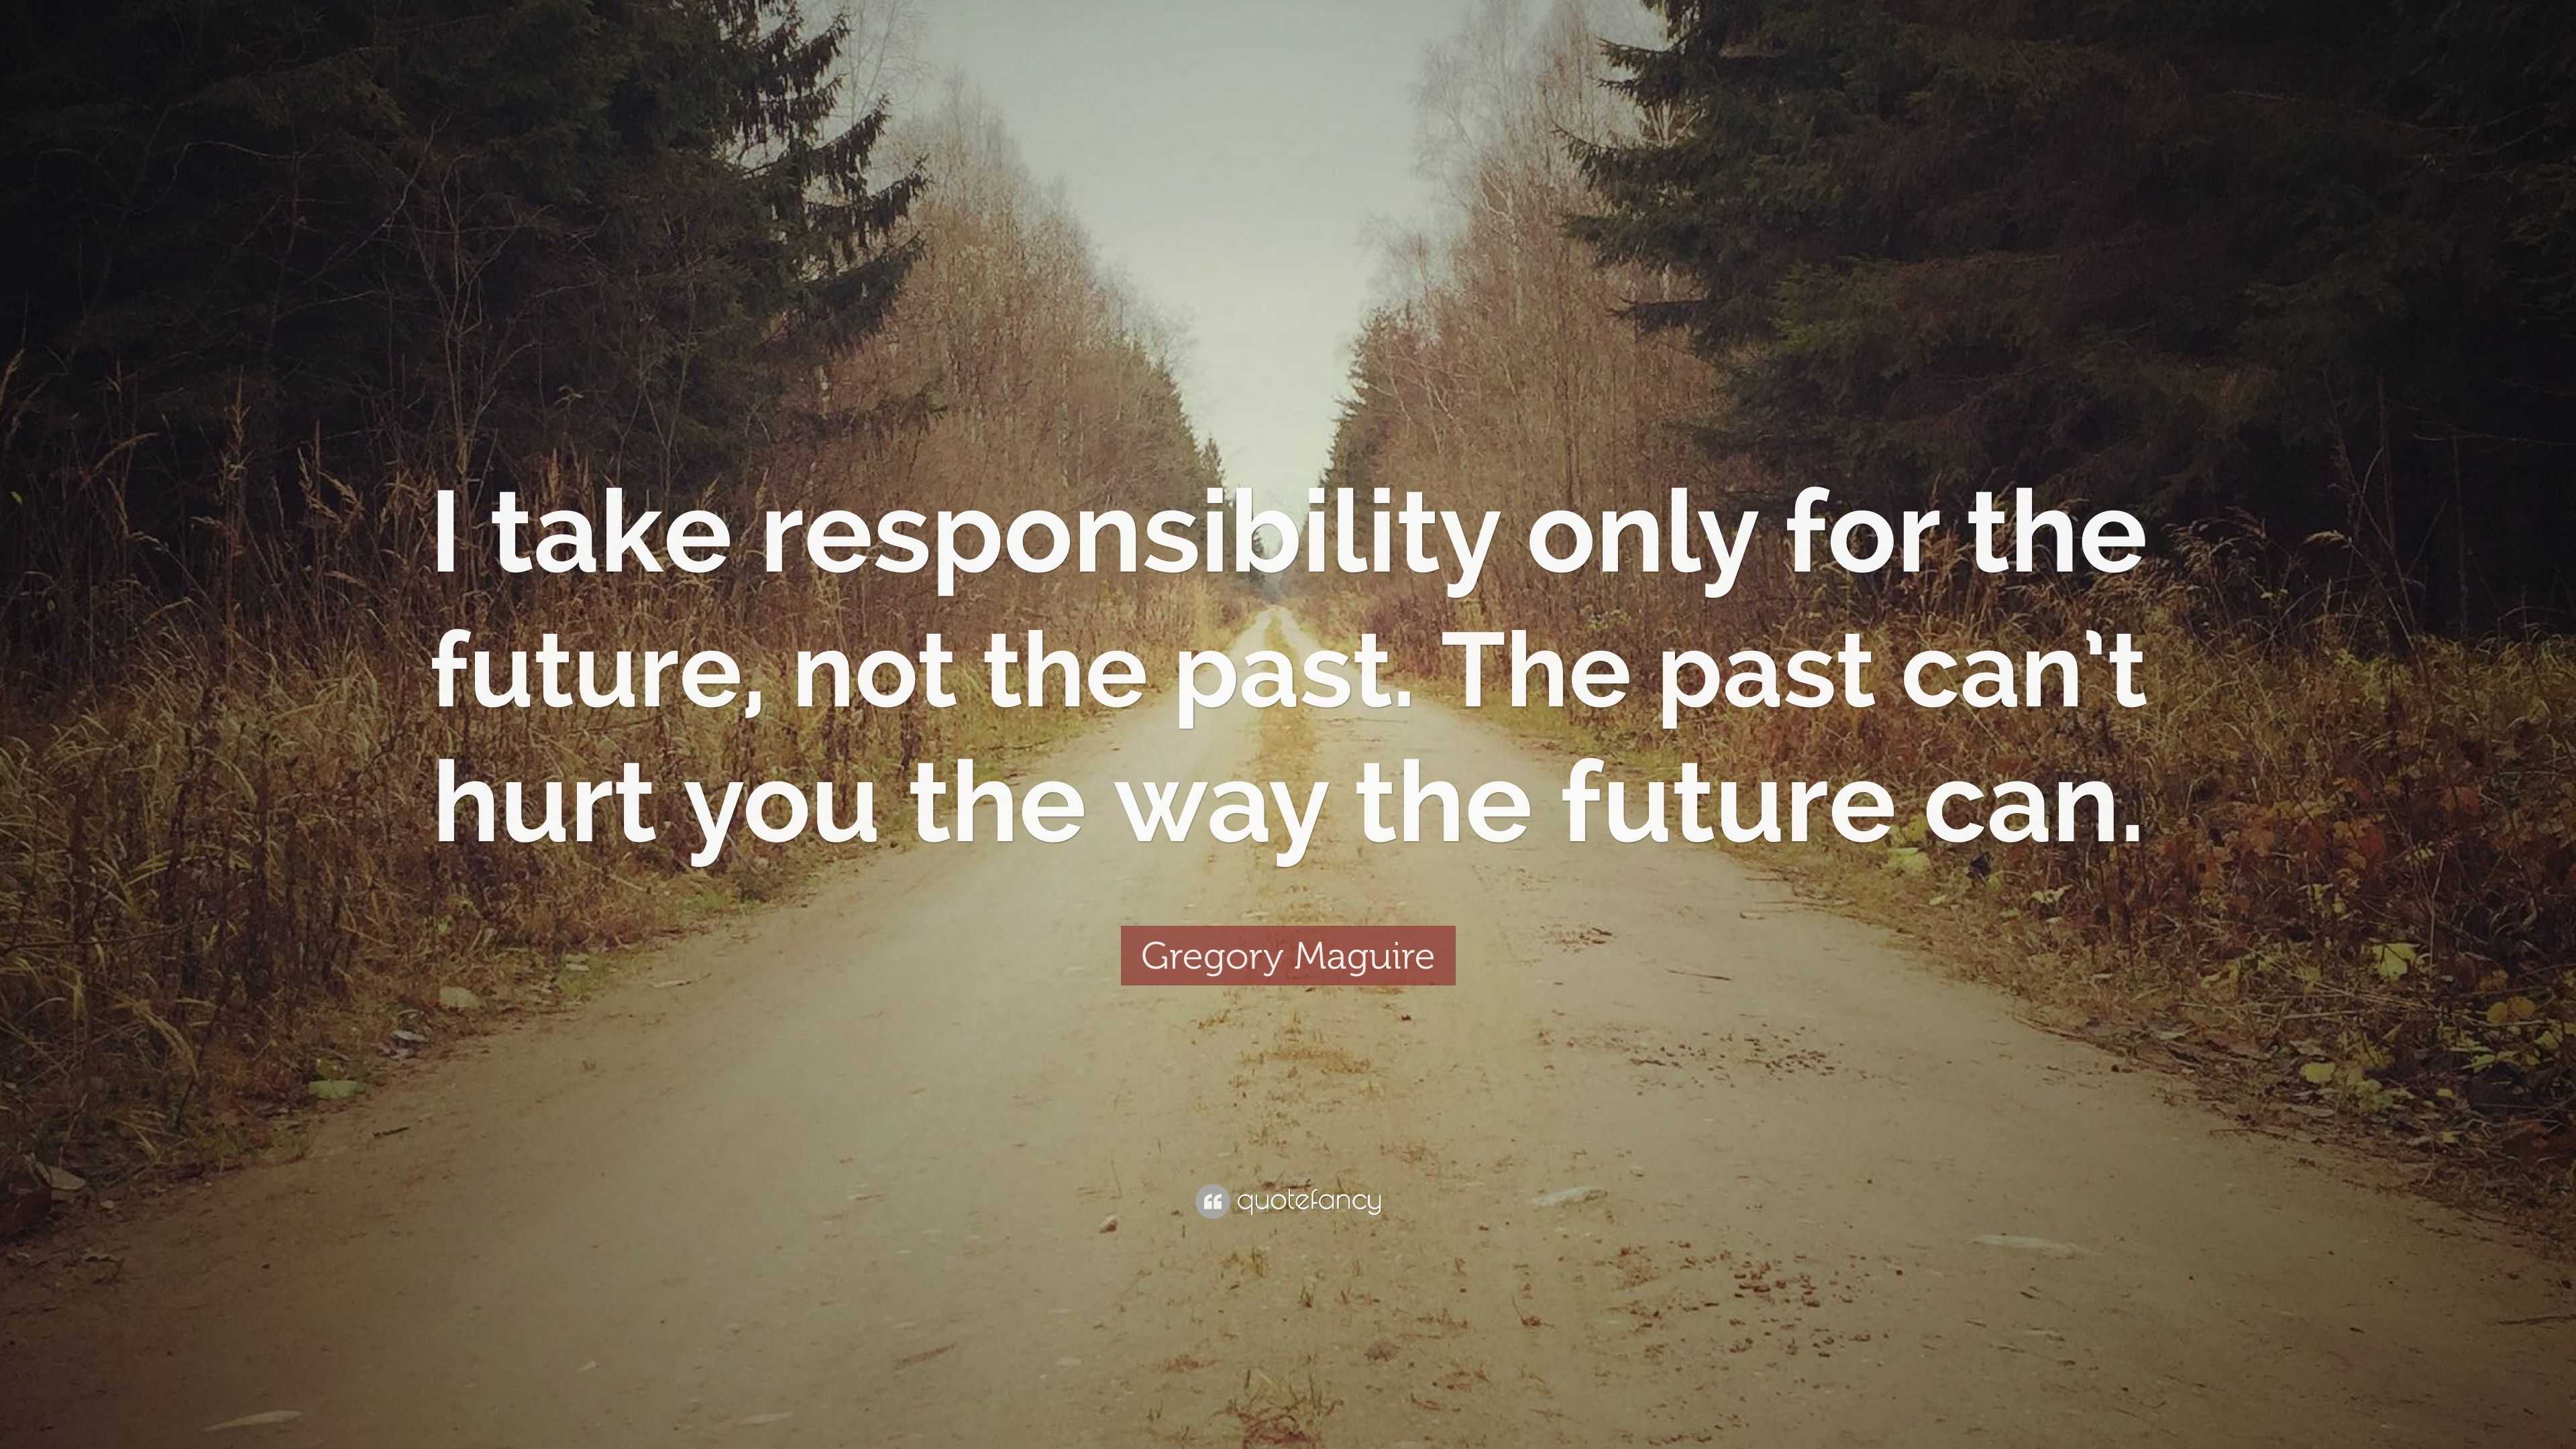 Gregory Maguire Quote: “I take responsibility only for the future, not ...